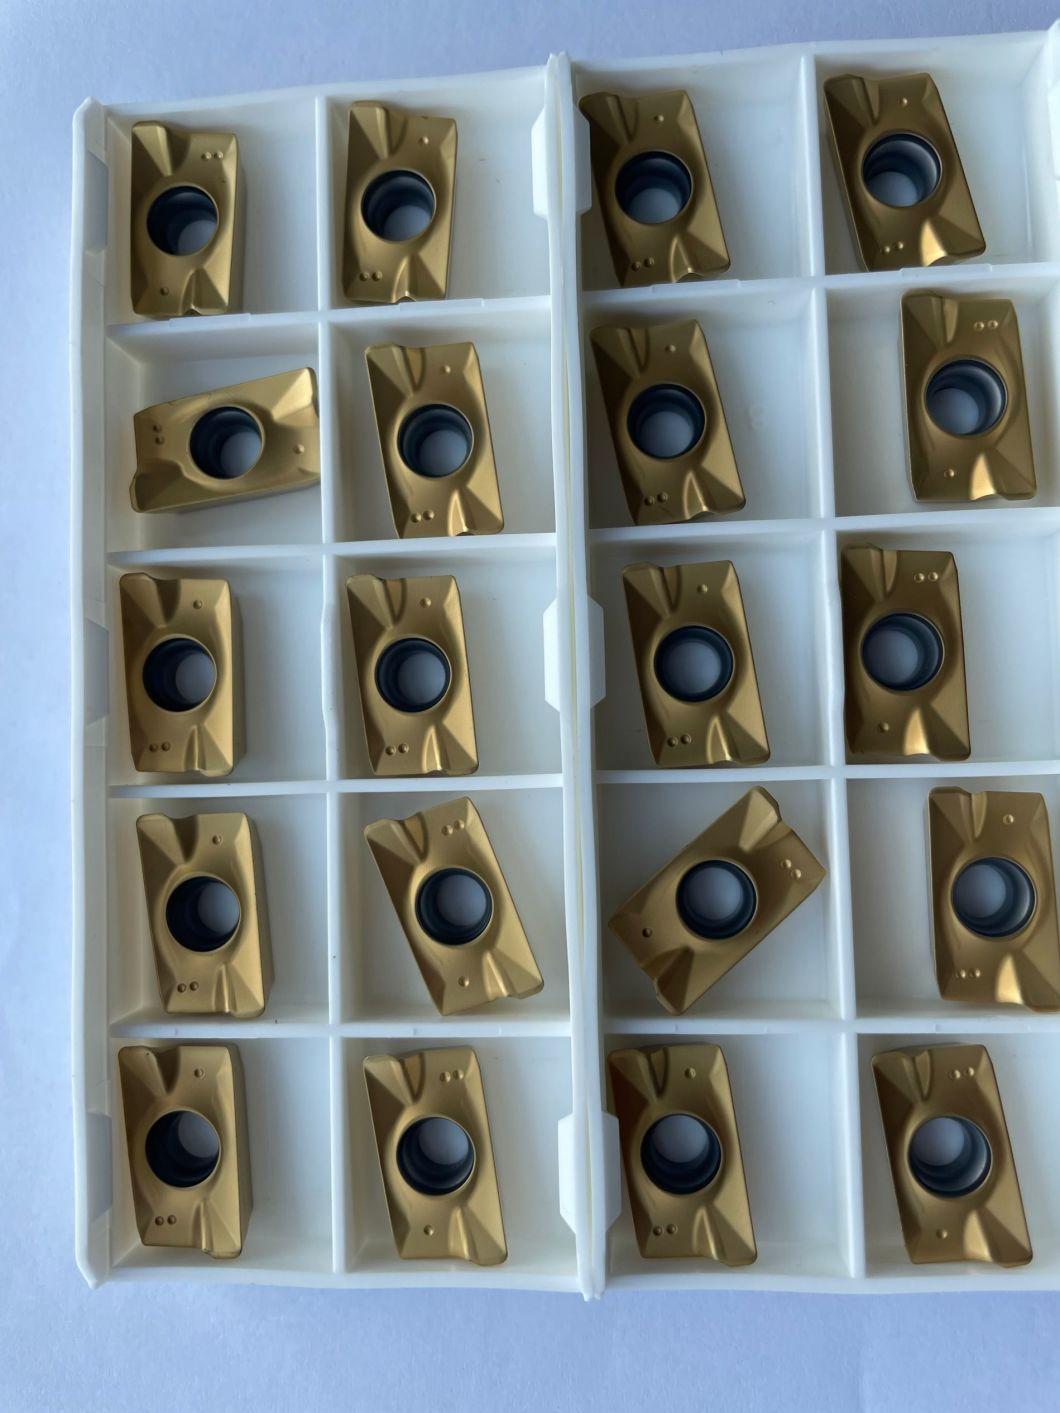 Tungsten Carbide Milling Inserts Apkt 1604 for The Aluminium Alloy Working